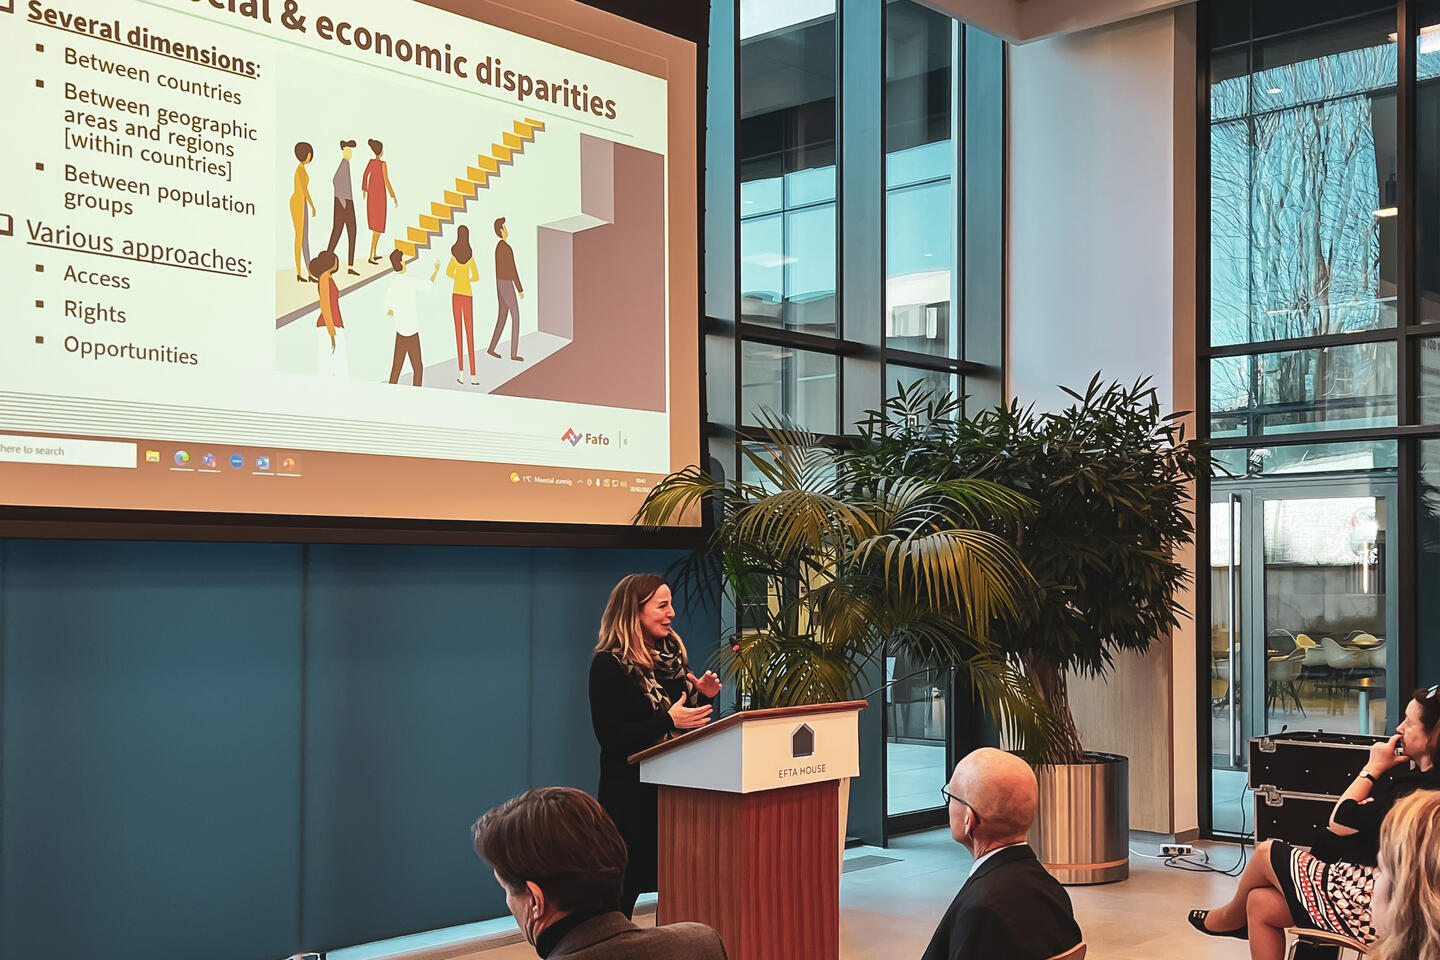 The researchers Kristin Dalen (pictured) and Åge A. Tiltnes from the Norwegian research foundation Fafo visited the EFTA House today to present their report